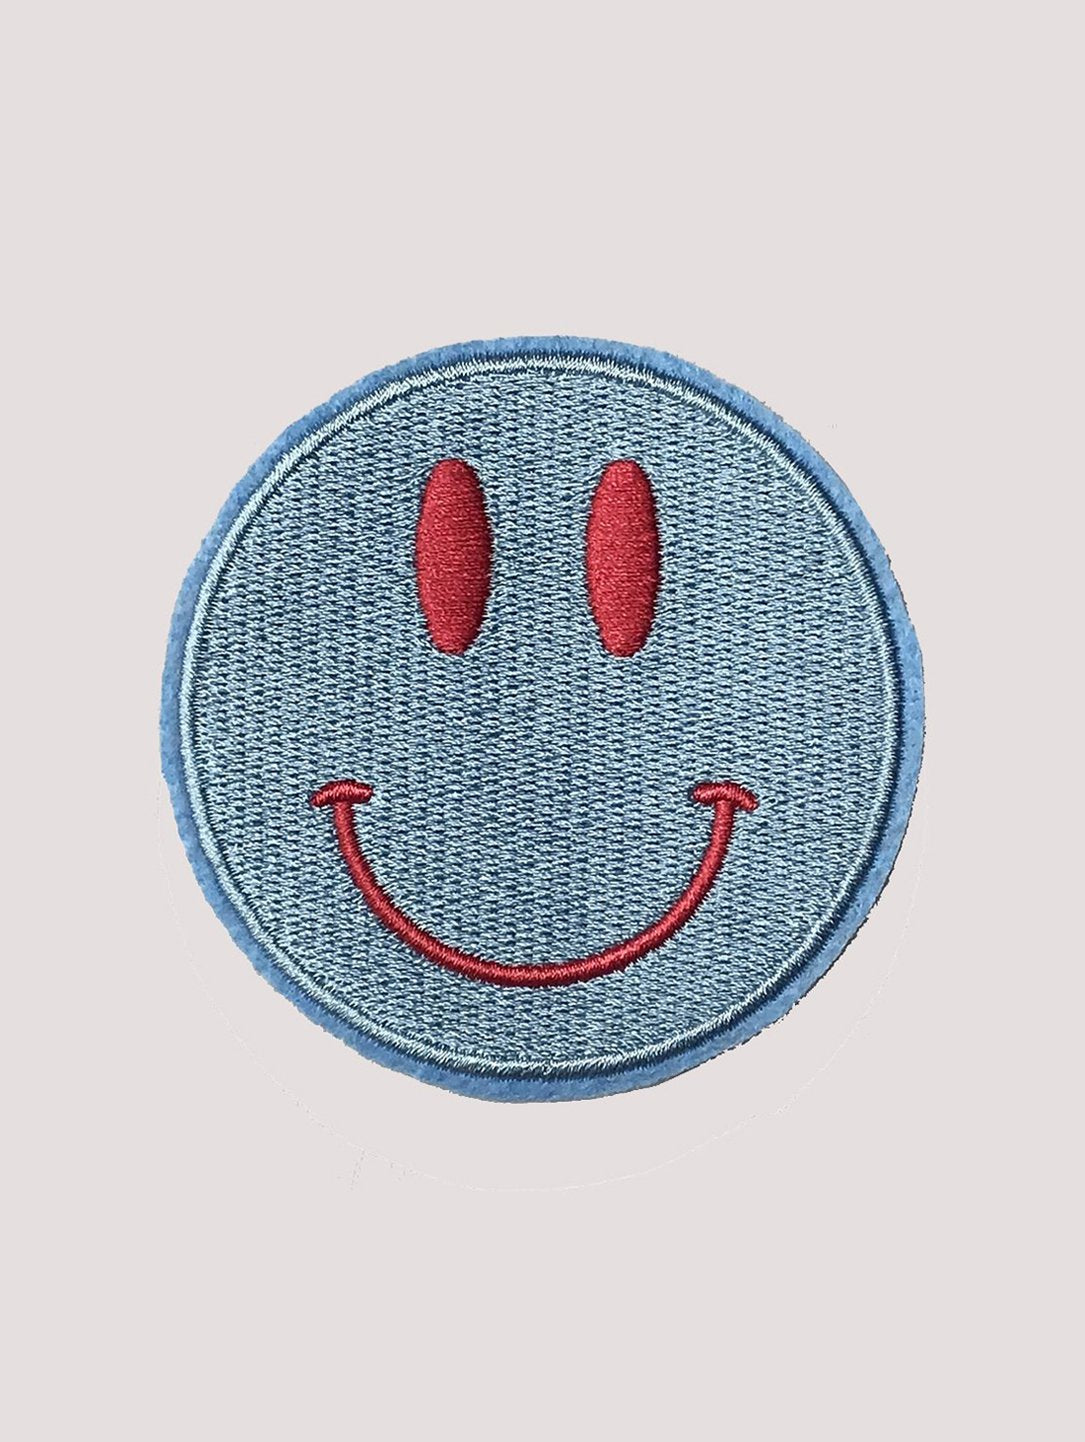 DANDY STAR PATCHES + BADGES